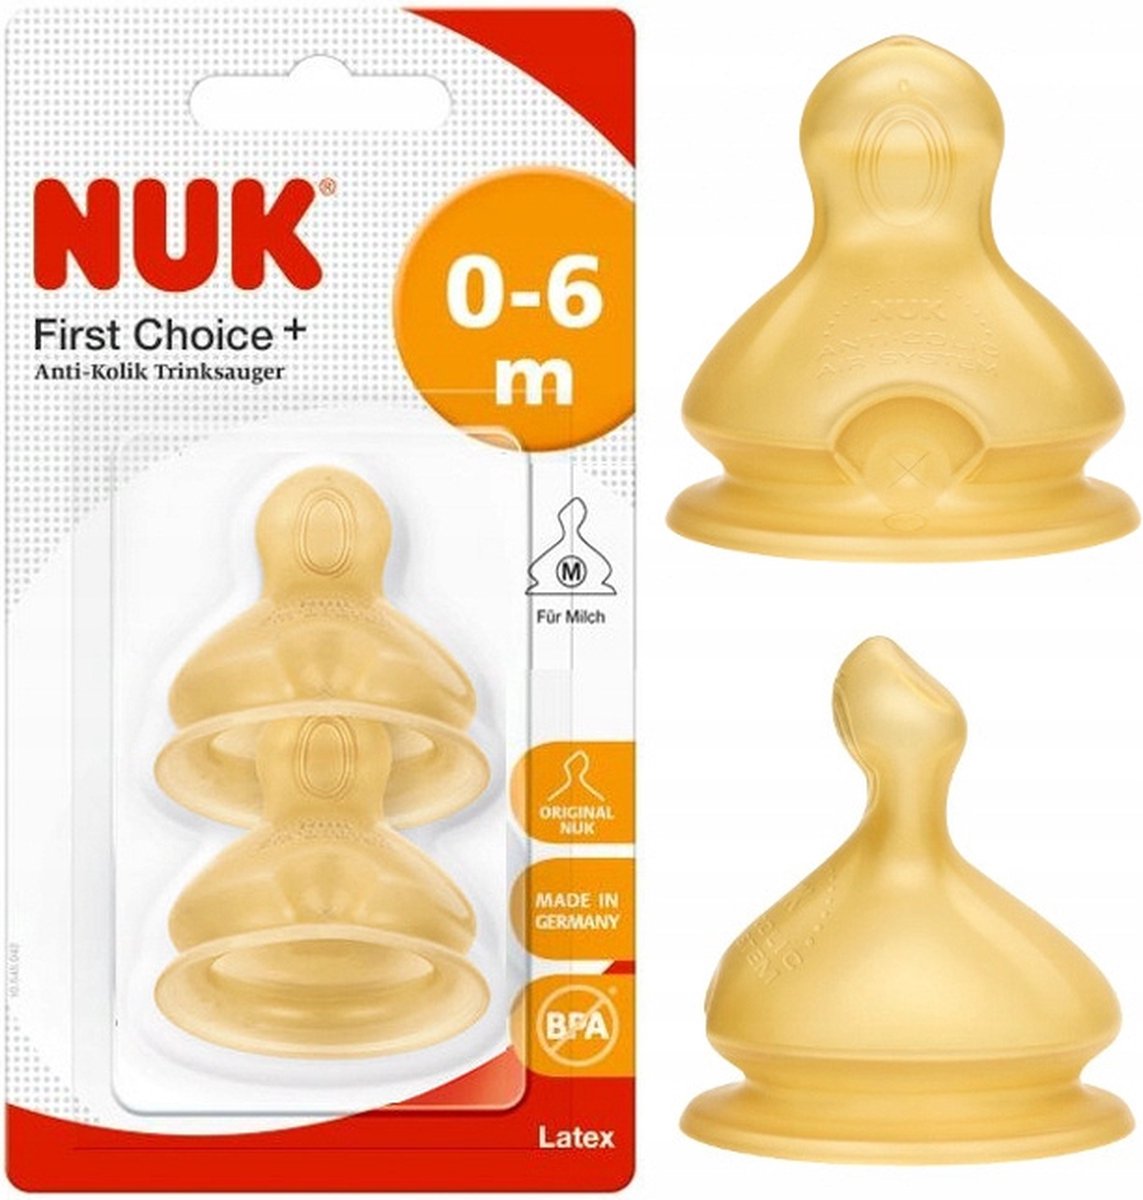 NUK First Choice + - Tétines Physiologiques 6-18 Mois 